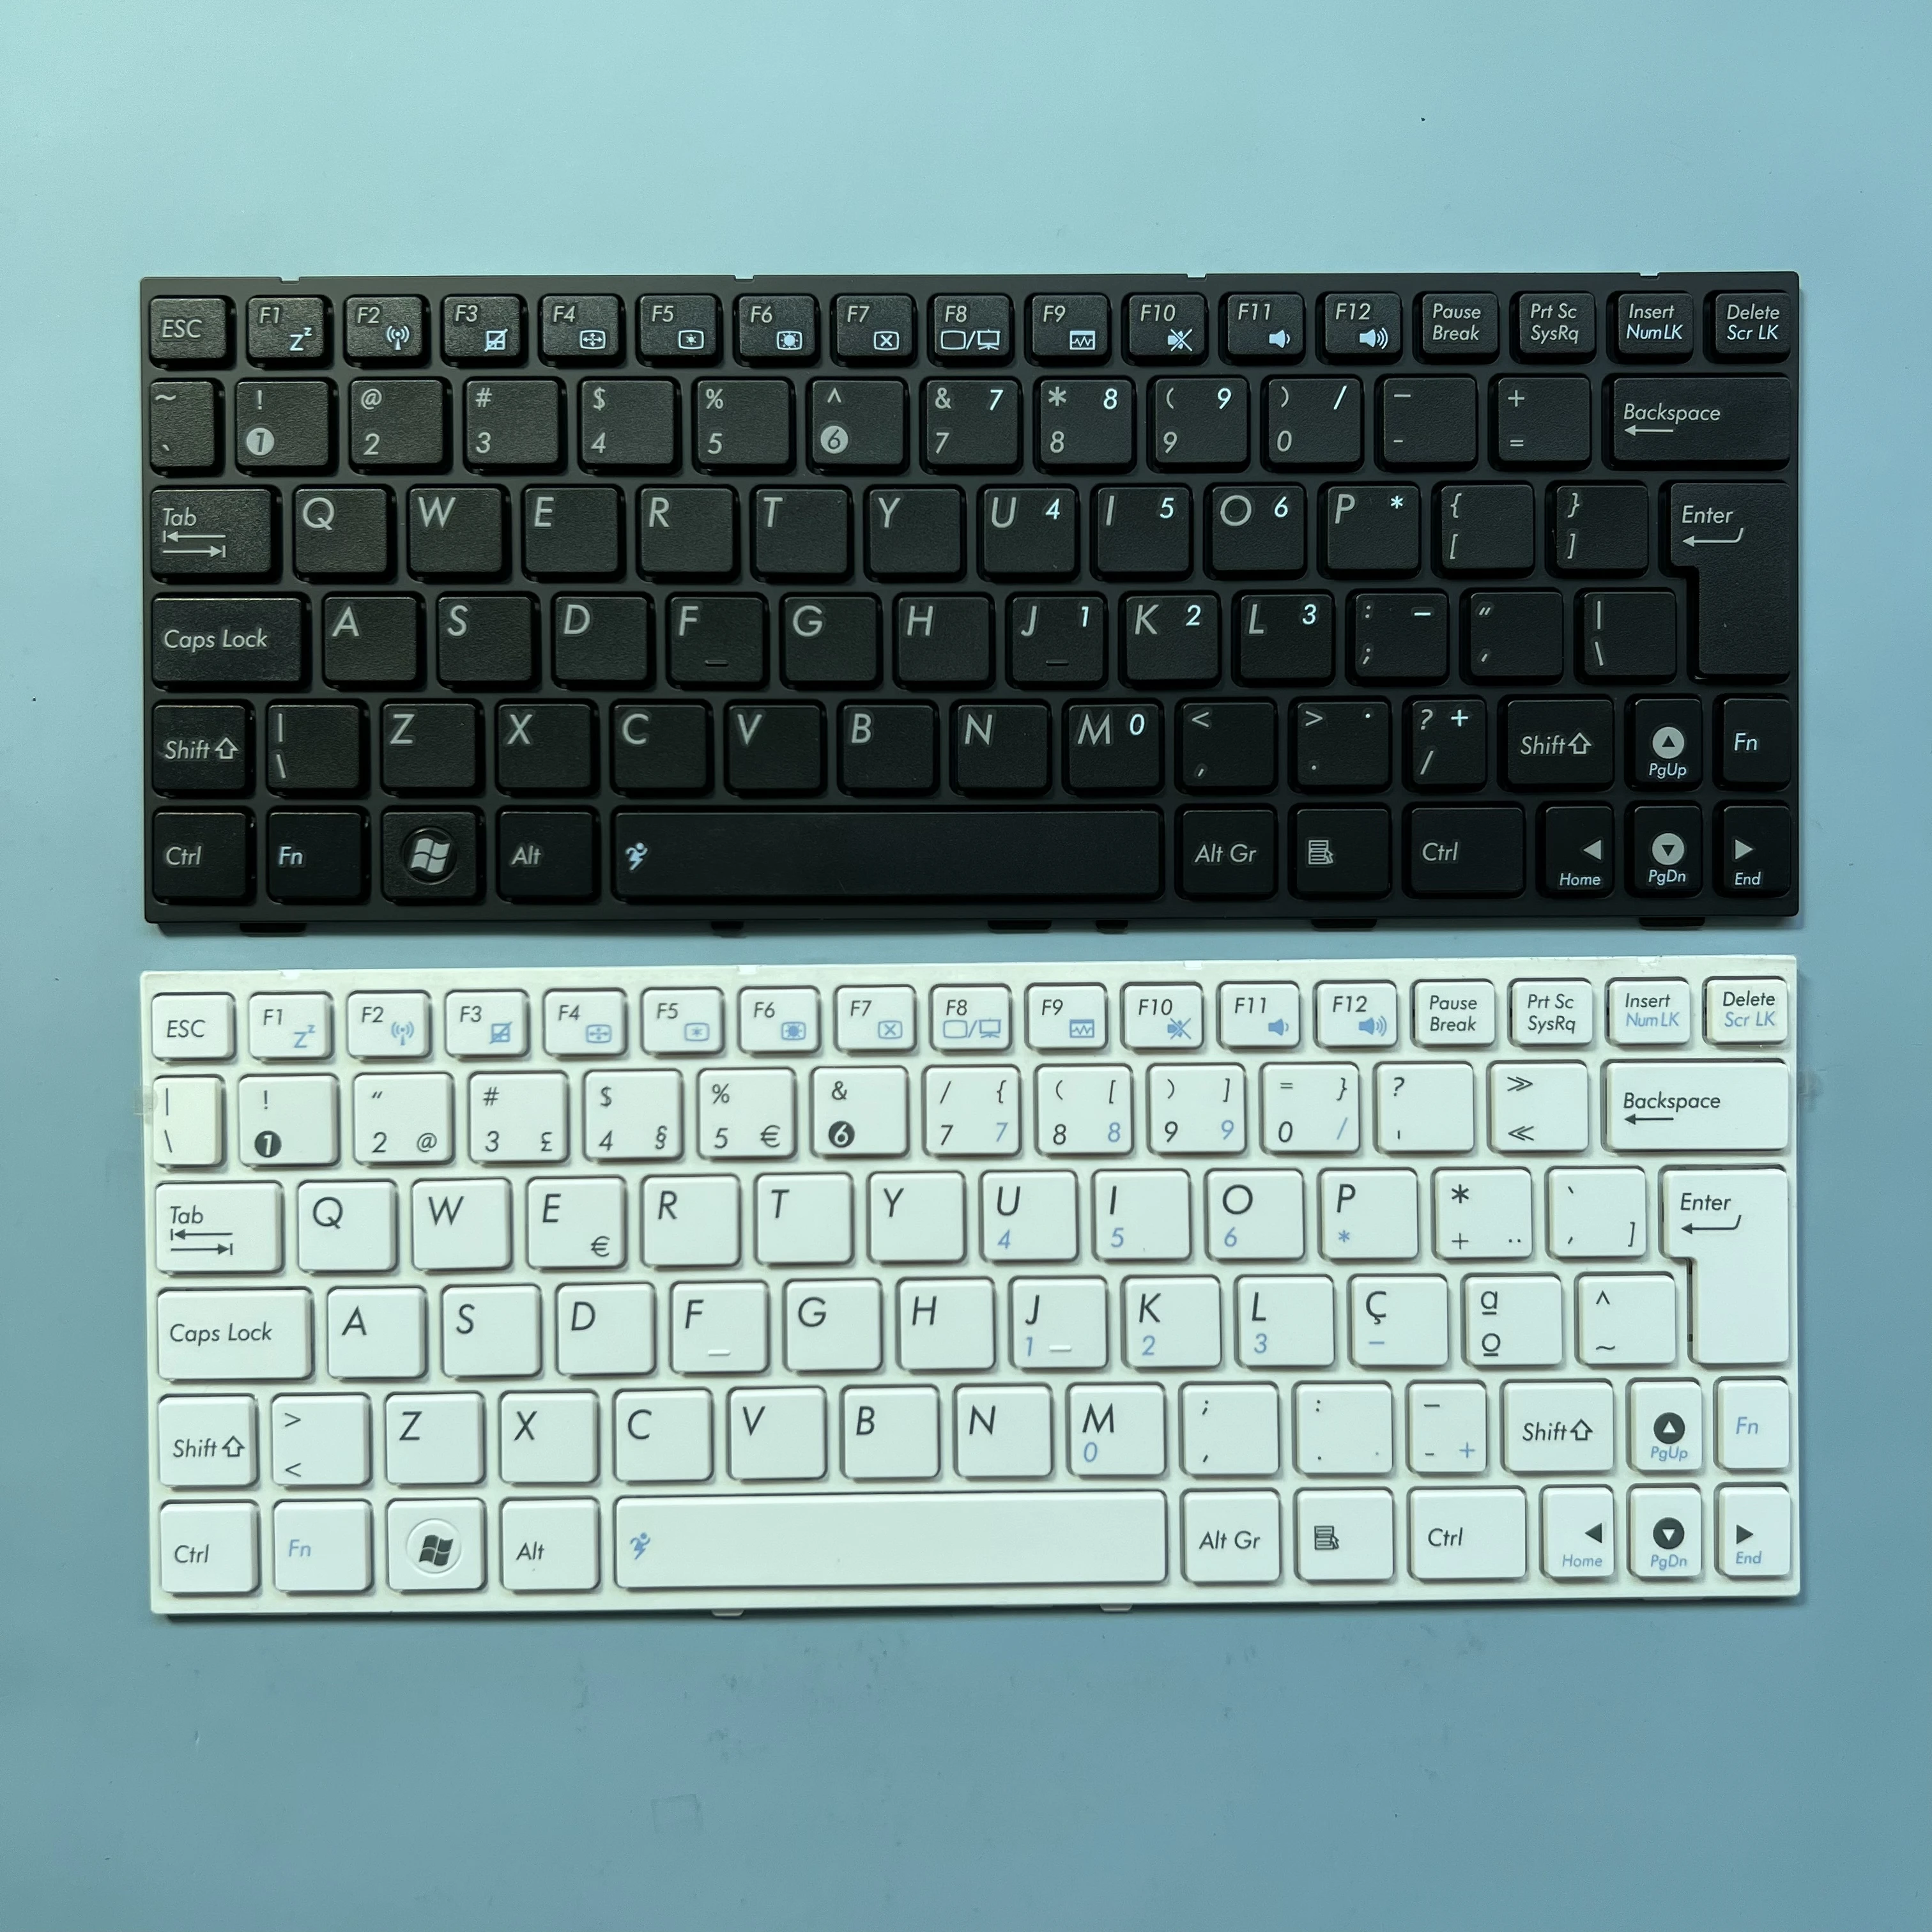 

XIN US Keyboard For ASUS EEEPC EPC 1005 1001 1005P 1005PE 1005PEG 1005PG 1008p 1005PX laptop English Keyboards With Frame